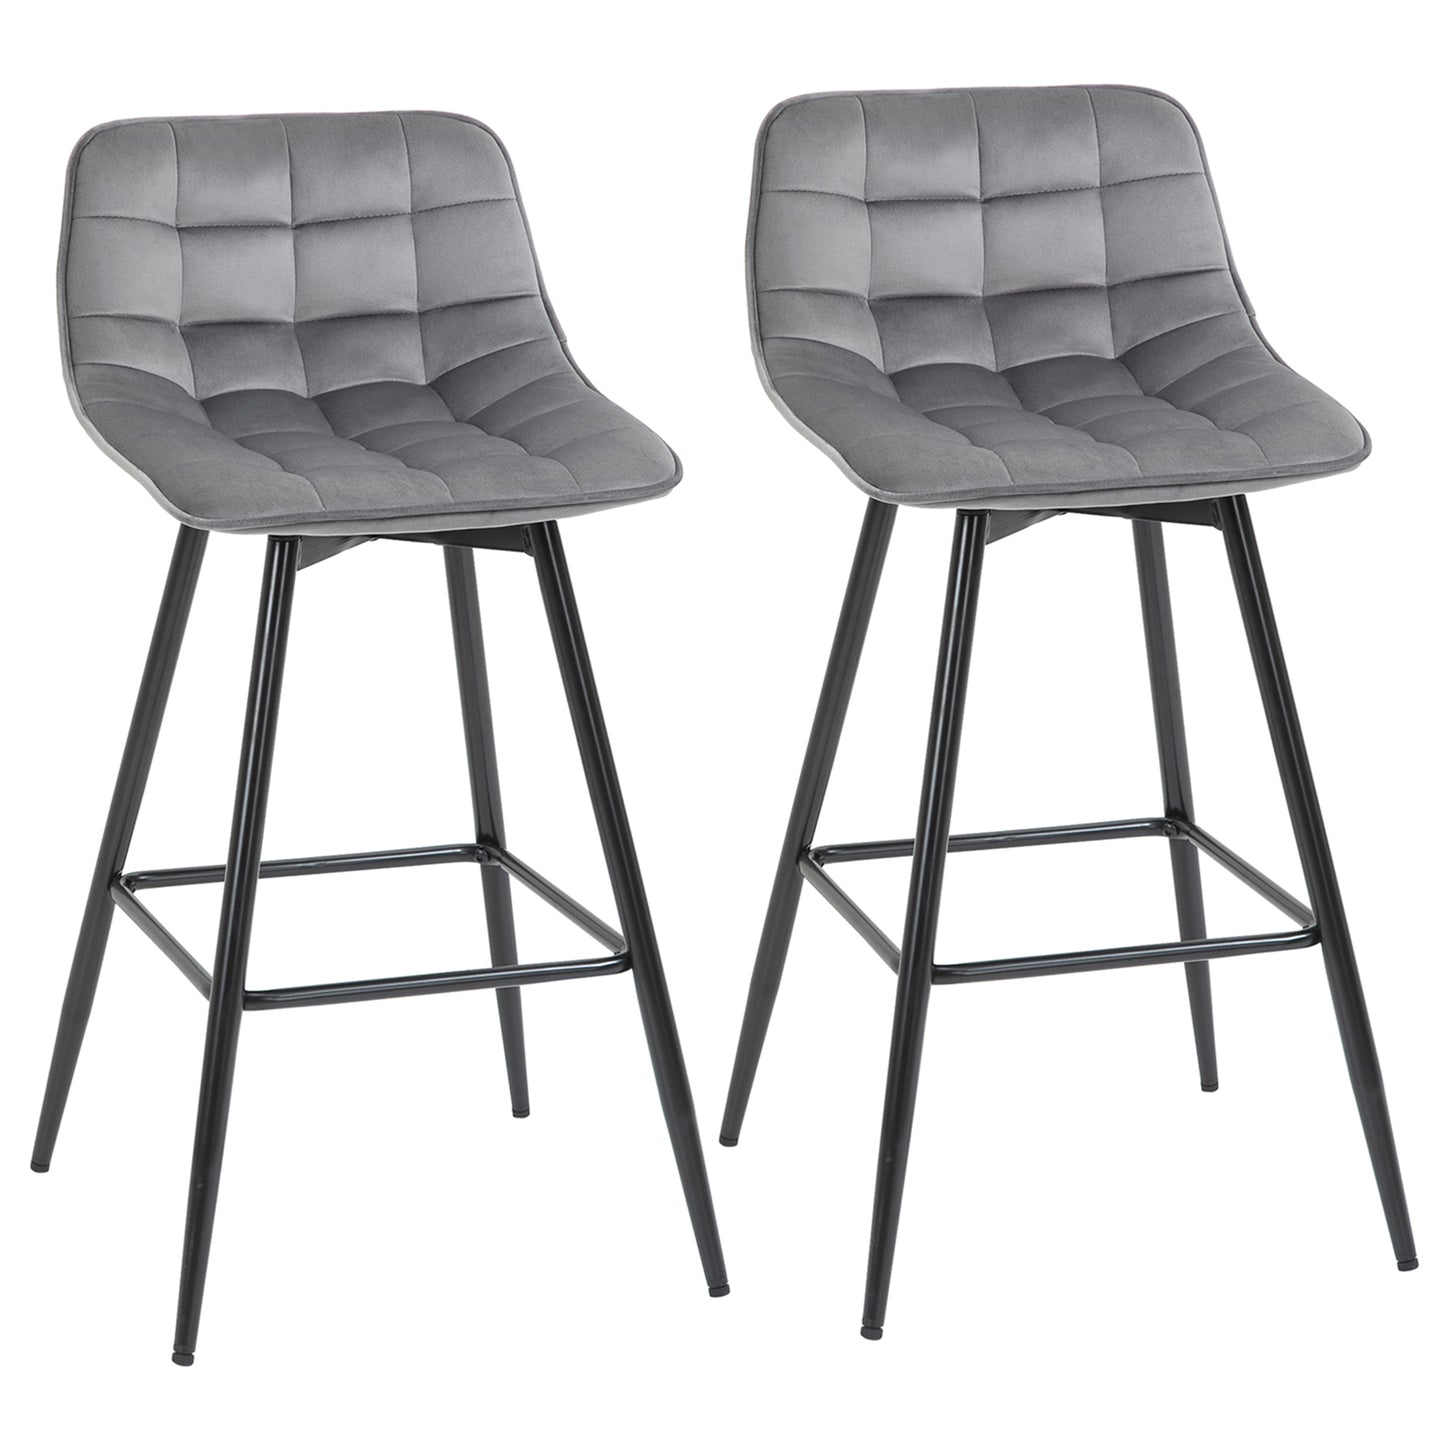 HOMCOM Counter Chairs Set of 2 Dining Chairs Bar Stools Fabric Upholstered seat